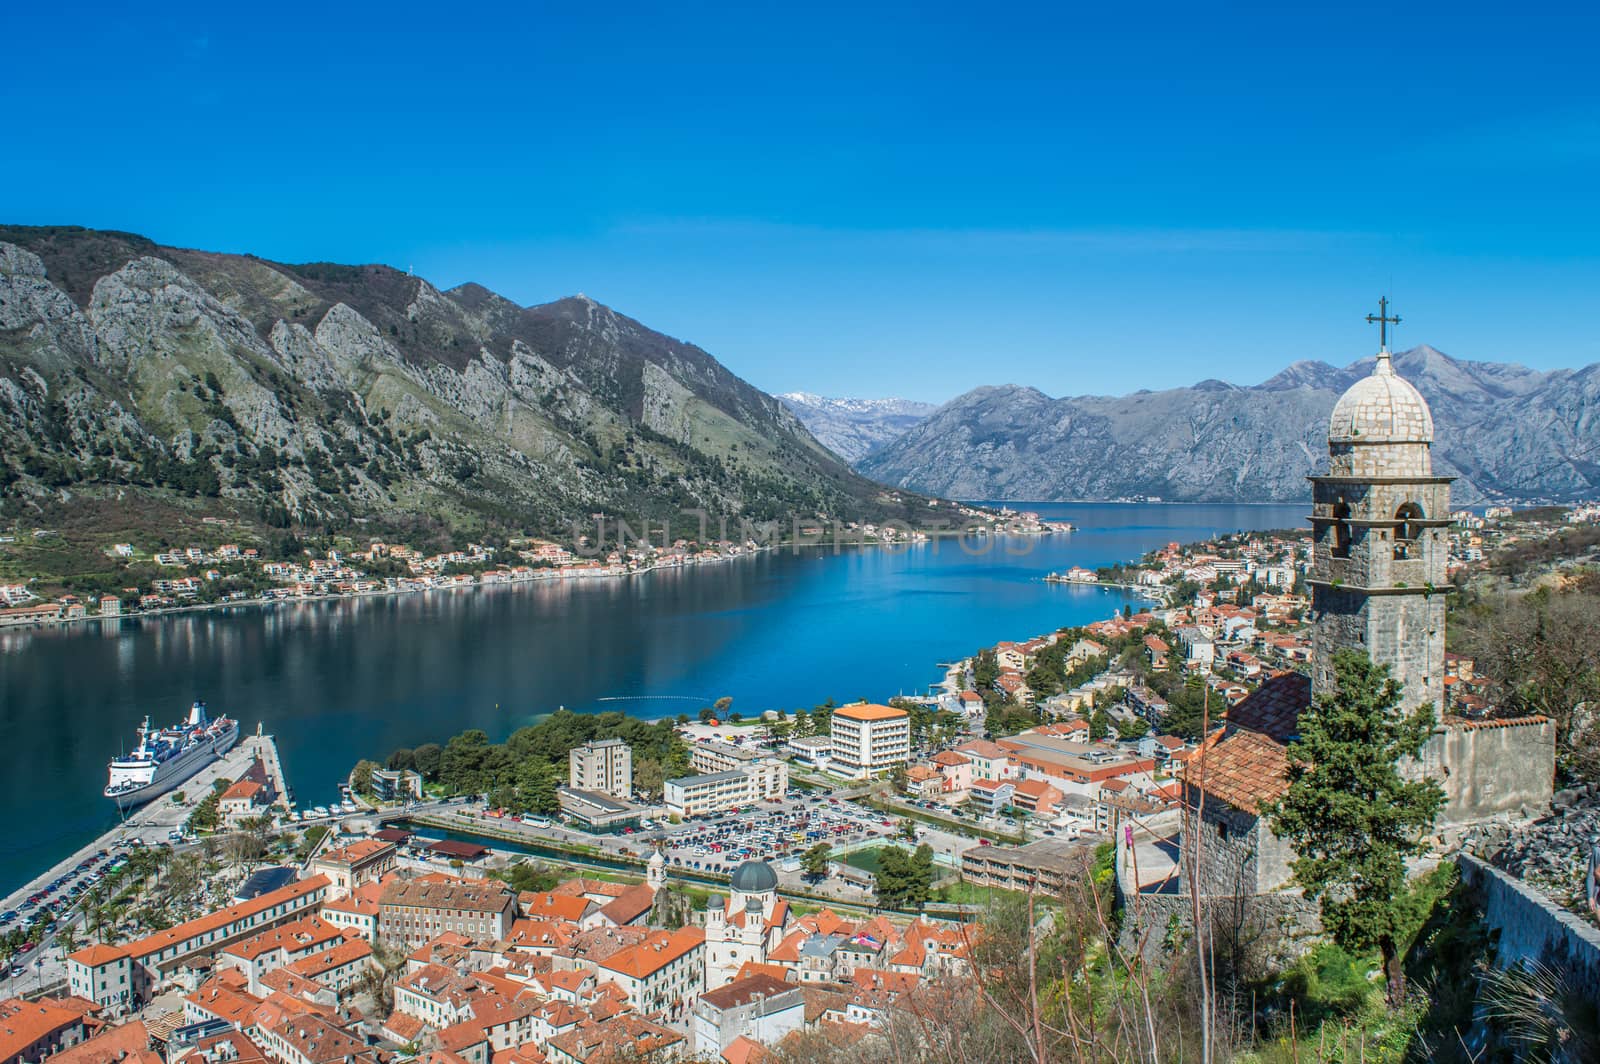 The old town of Kotor, view from the top